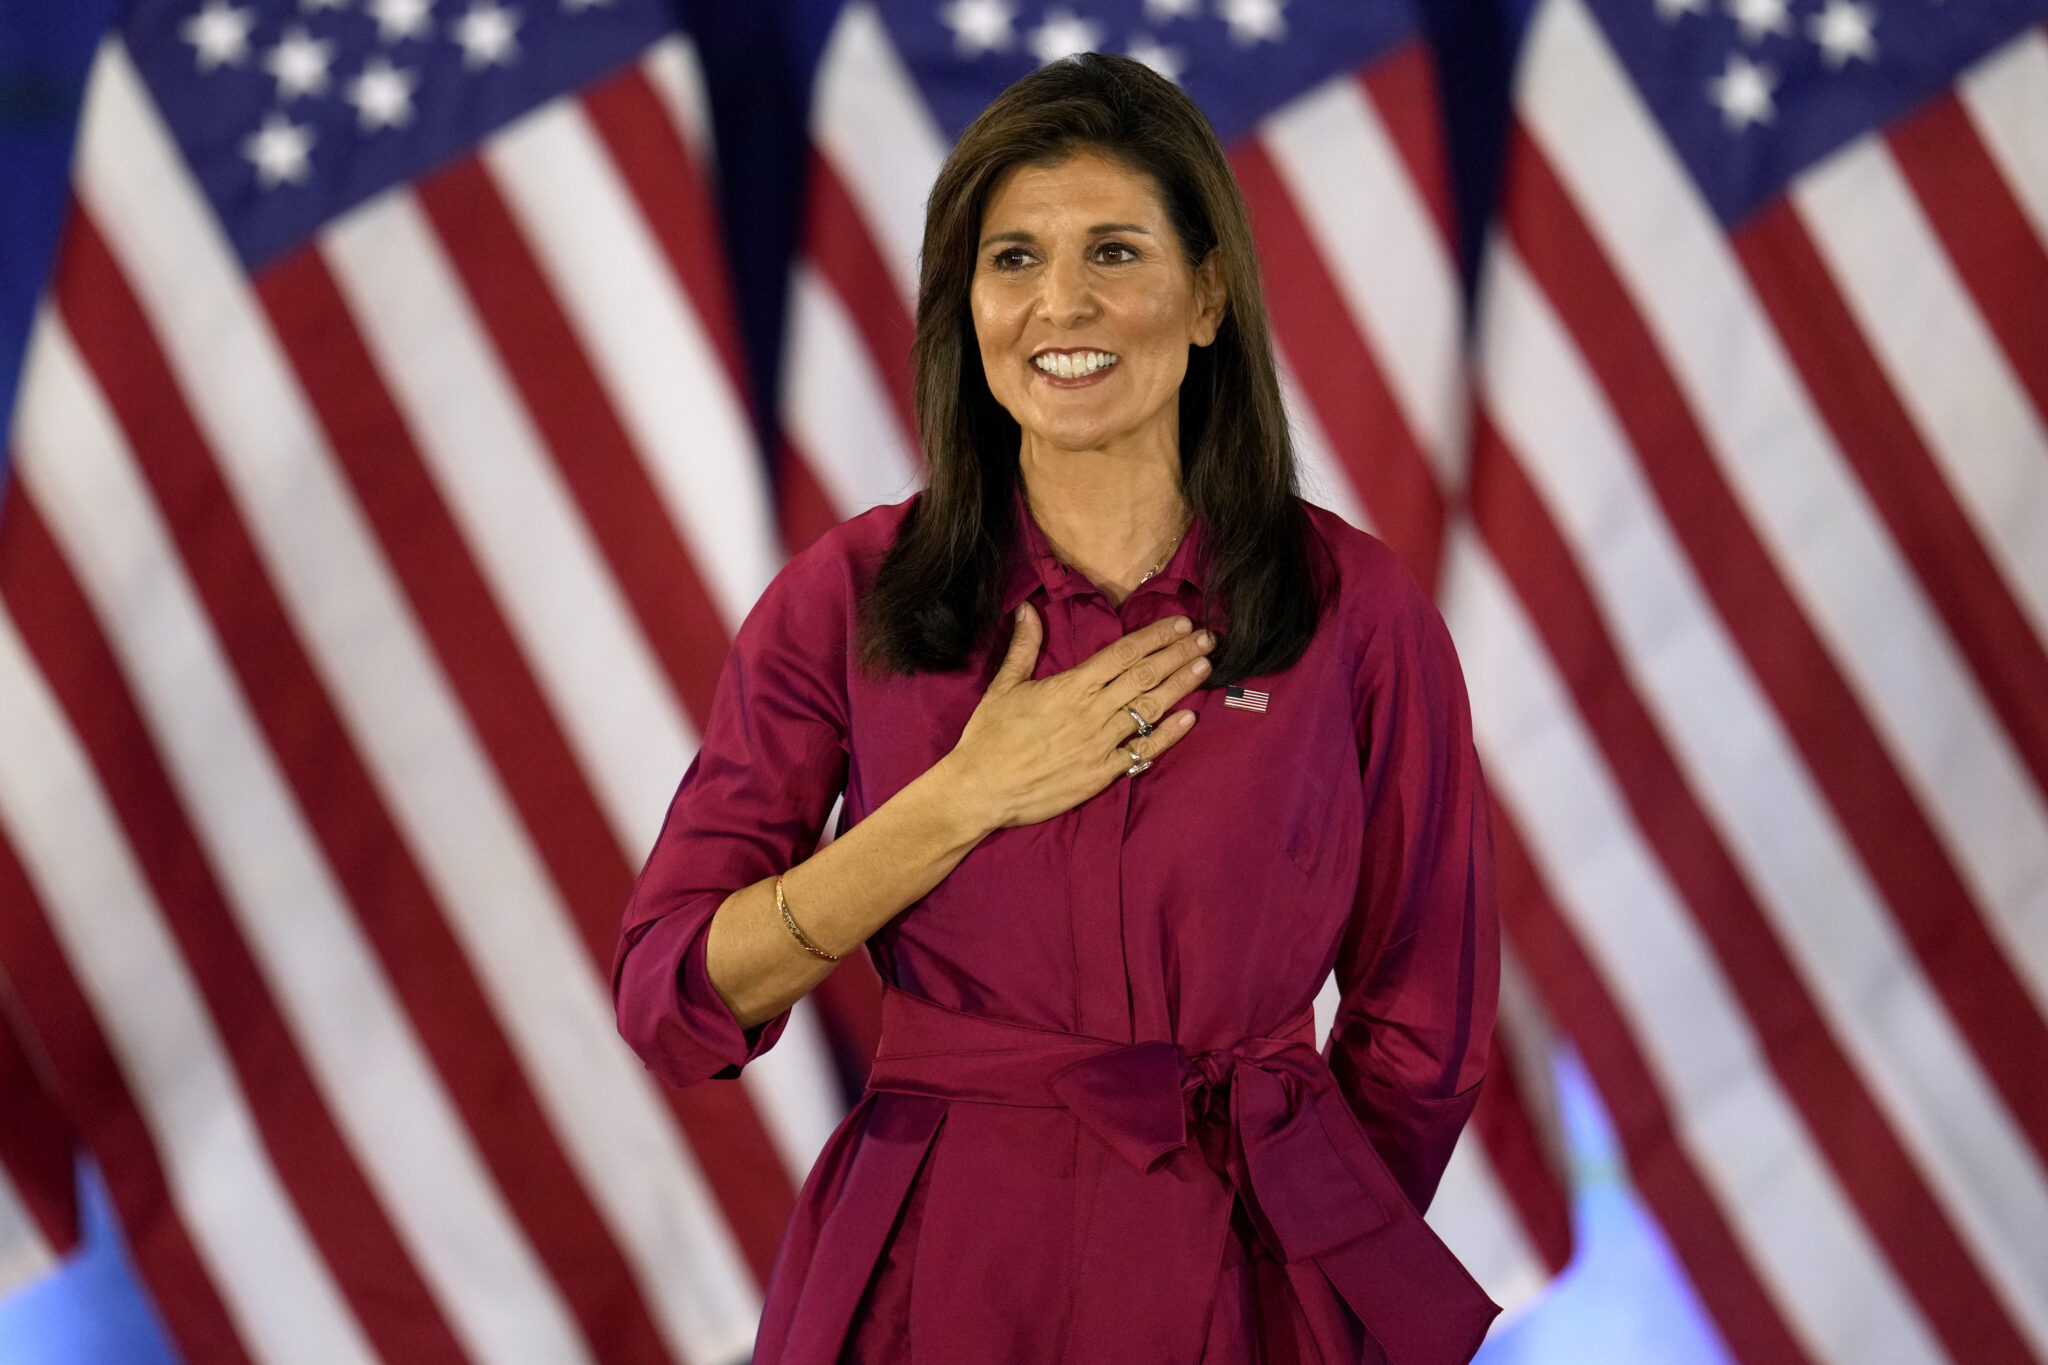  Some Nikki Haley voters are hanging on to her candidacy, refuse to endorse Trump 